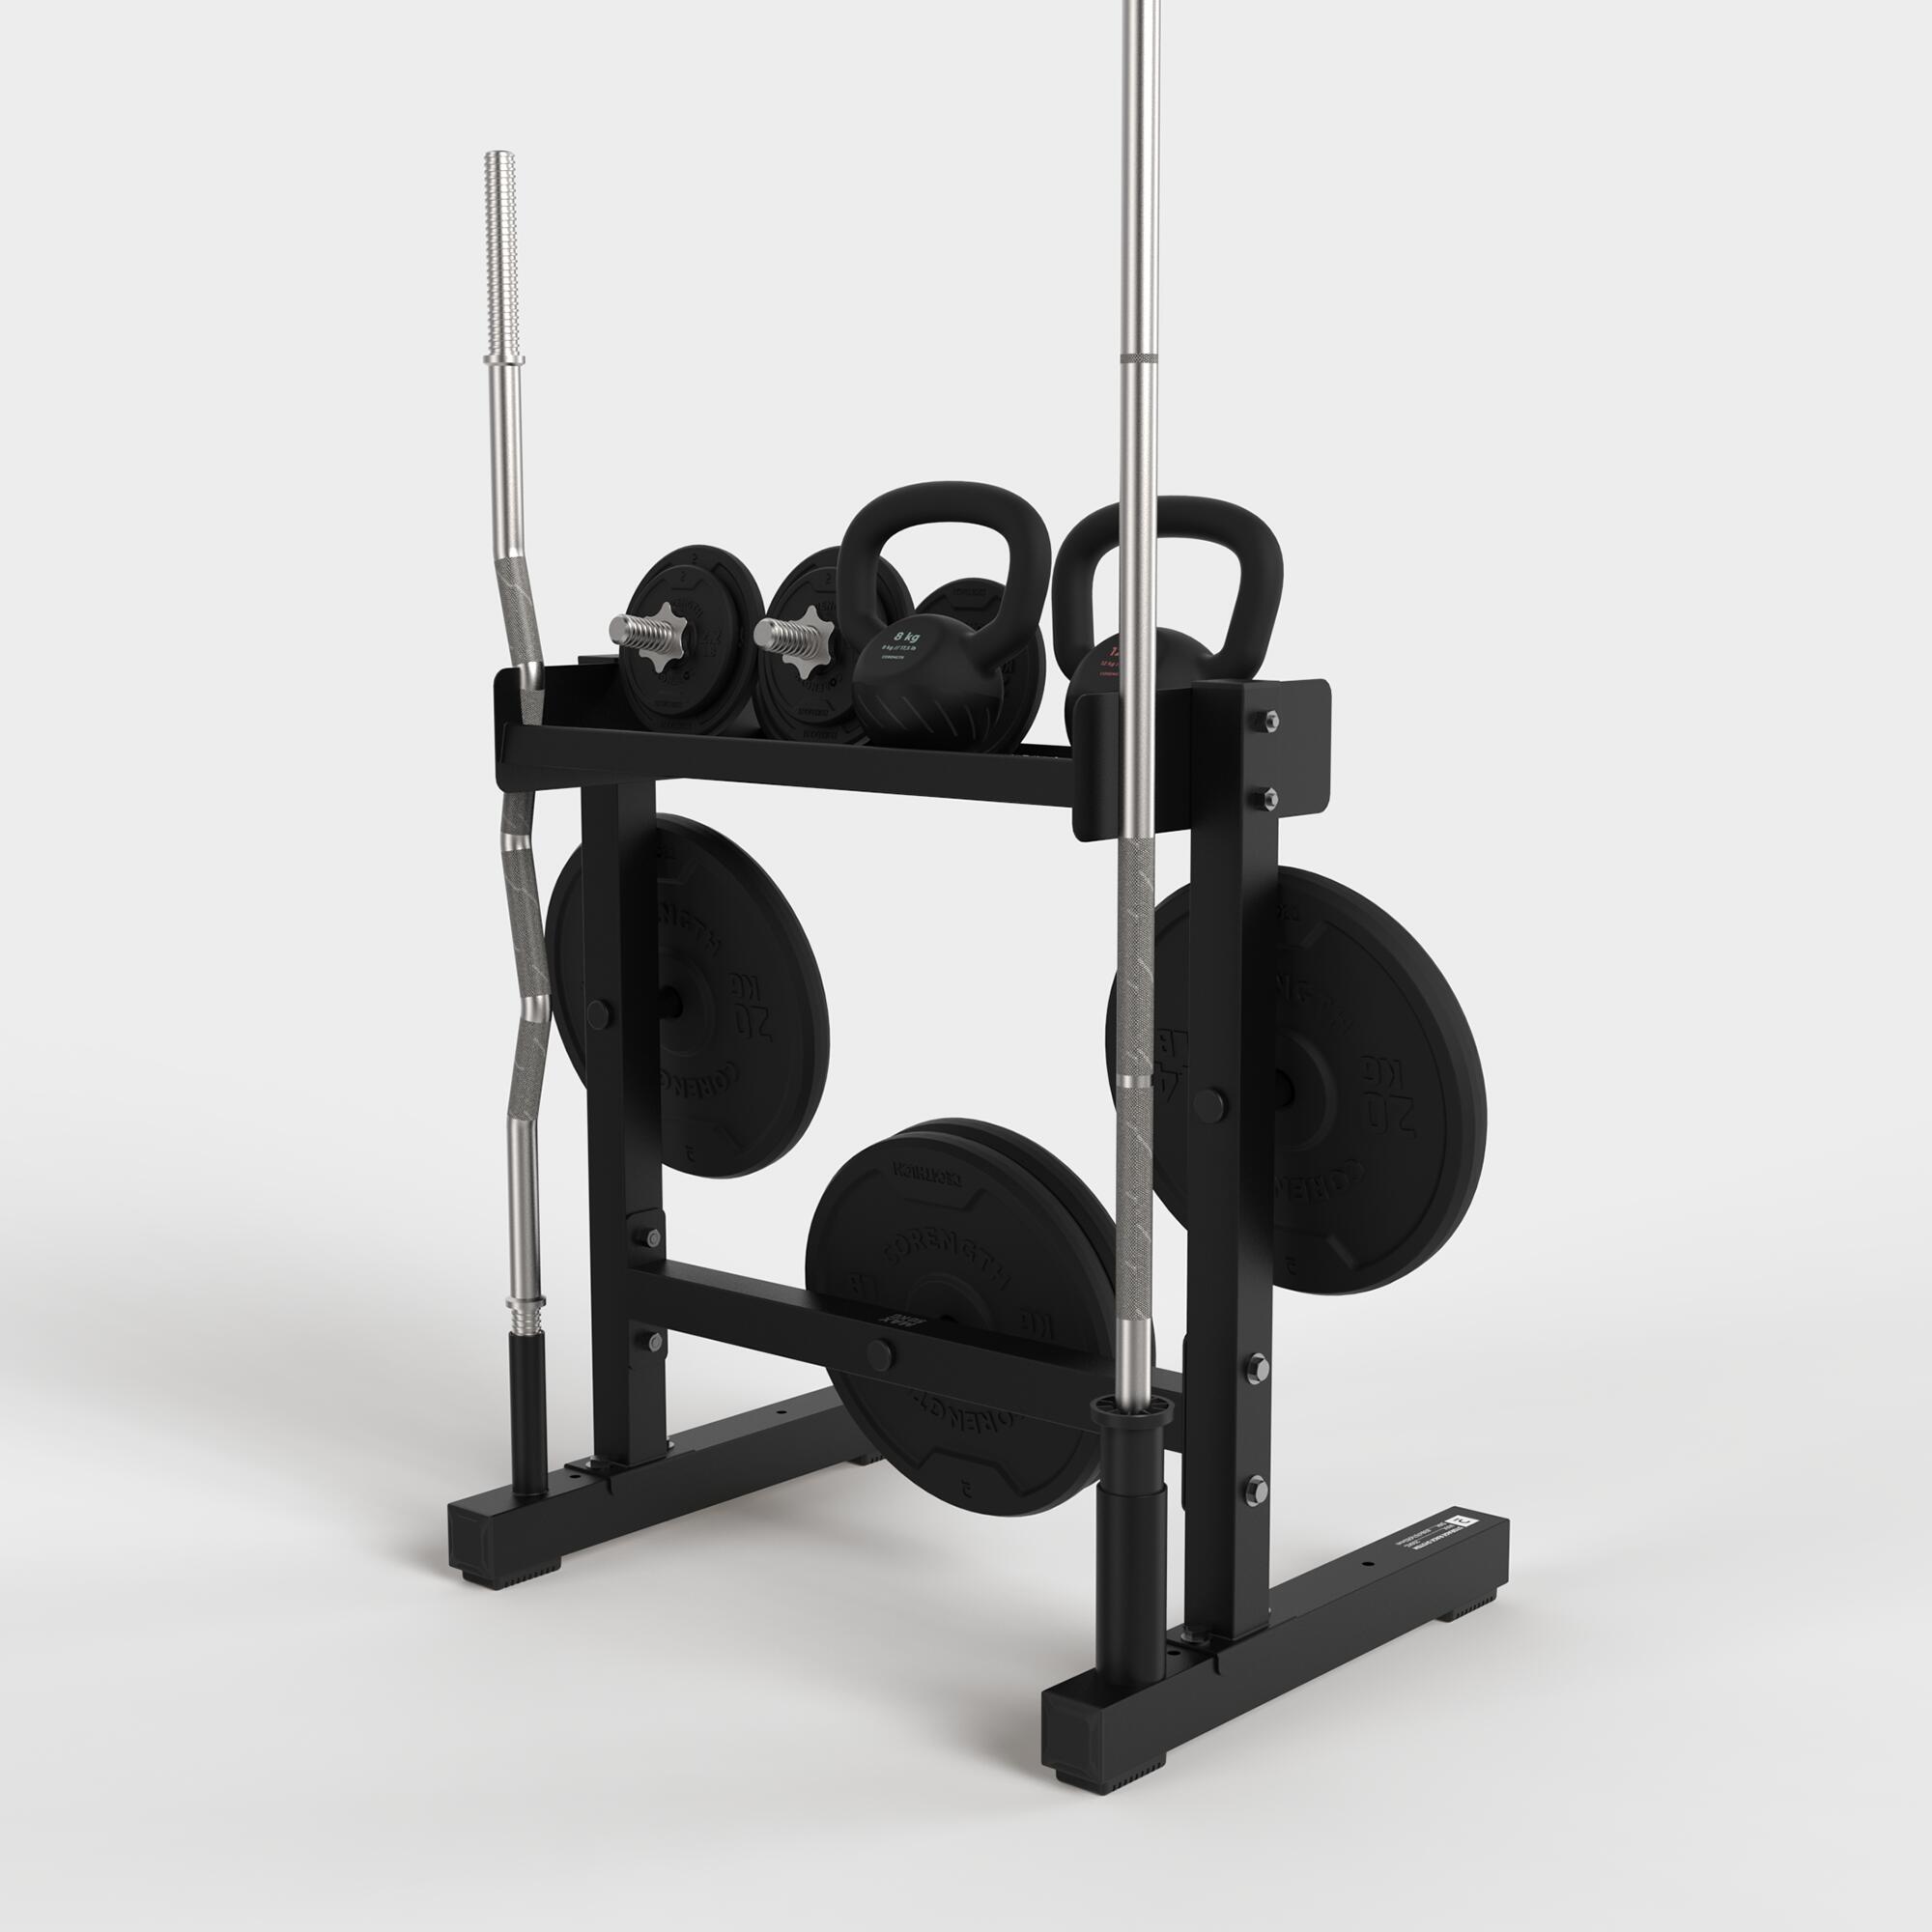 Weight Training Storage Rack for Bars and Weights 5/10